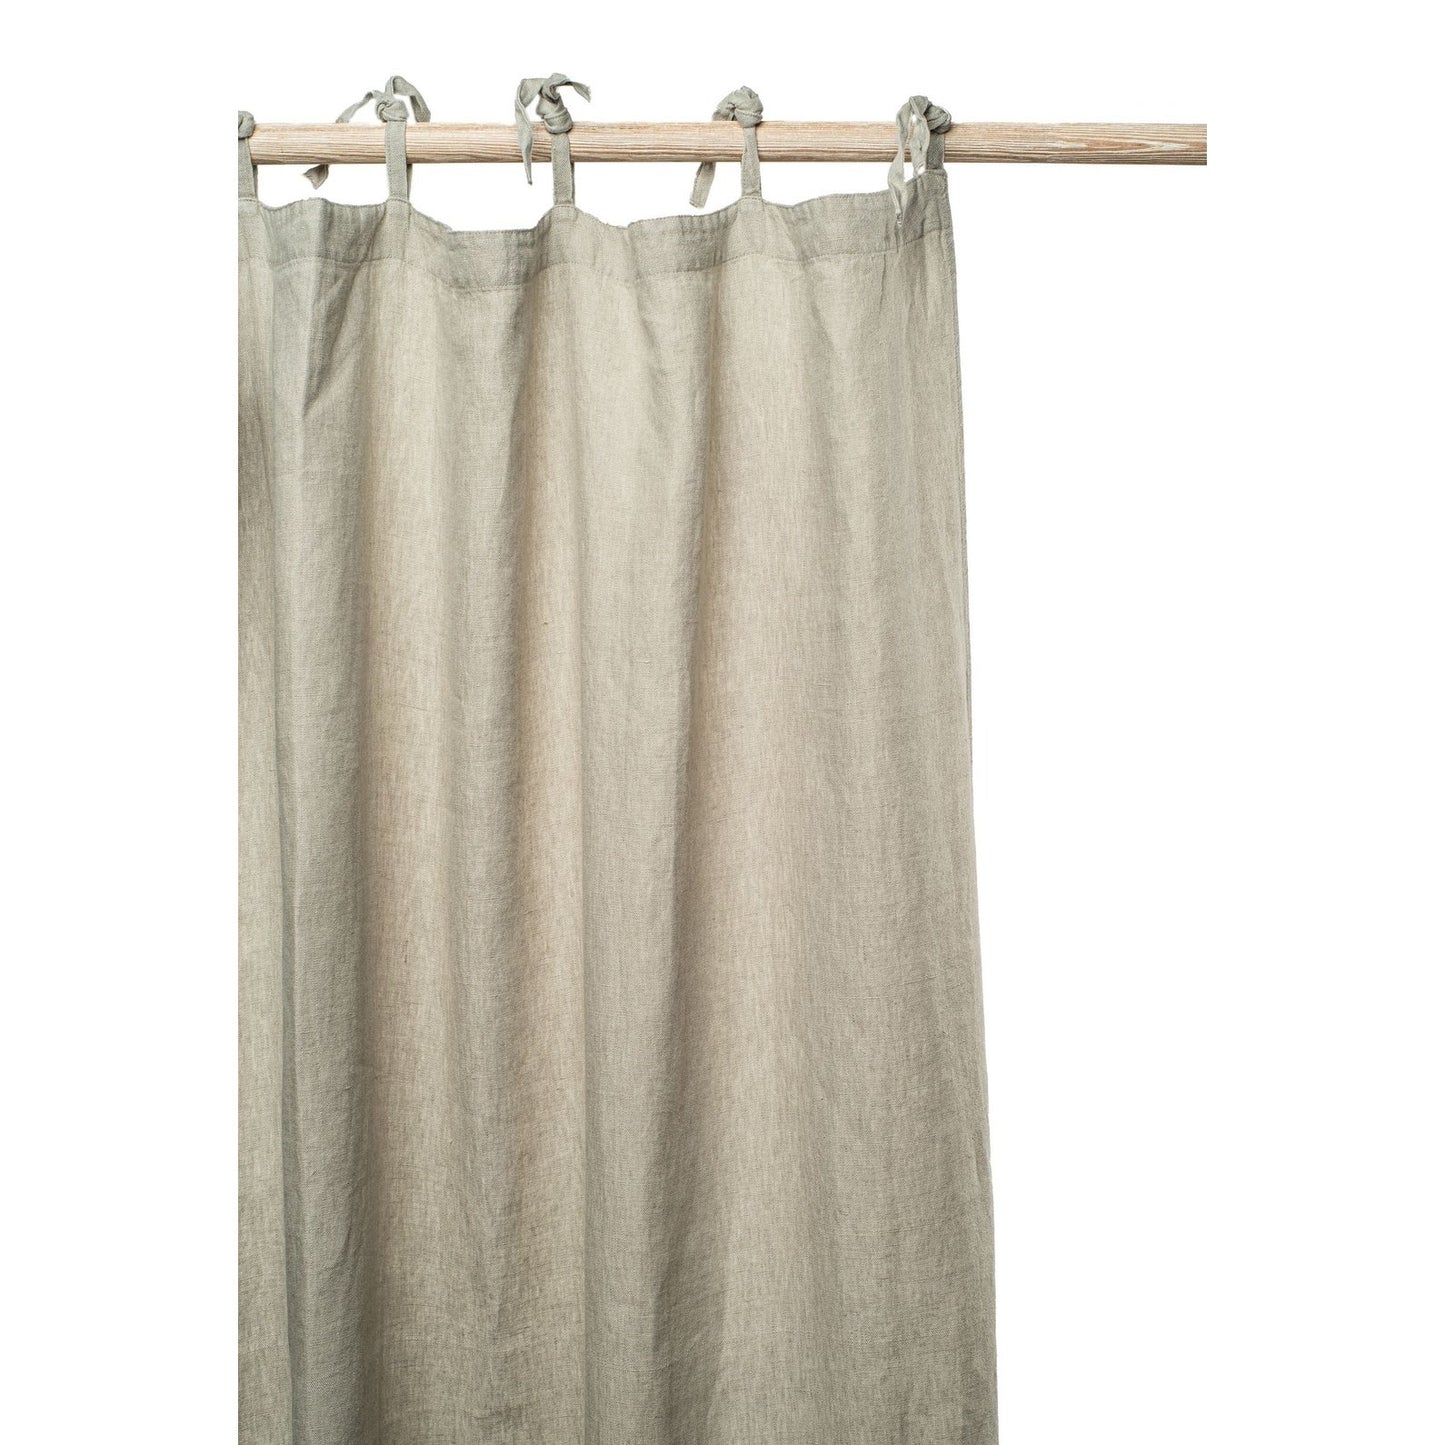 Layer the Emma 'Pebble' Linen Curtain with lace for a touch of whimsical charm.